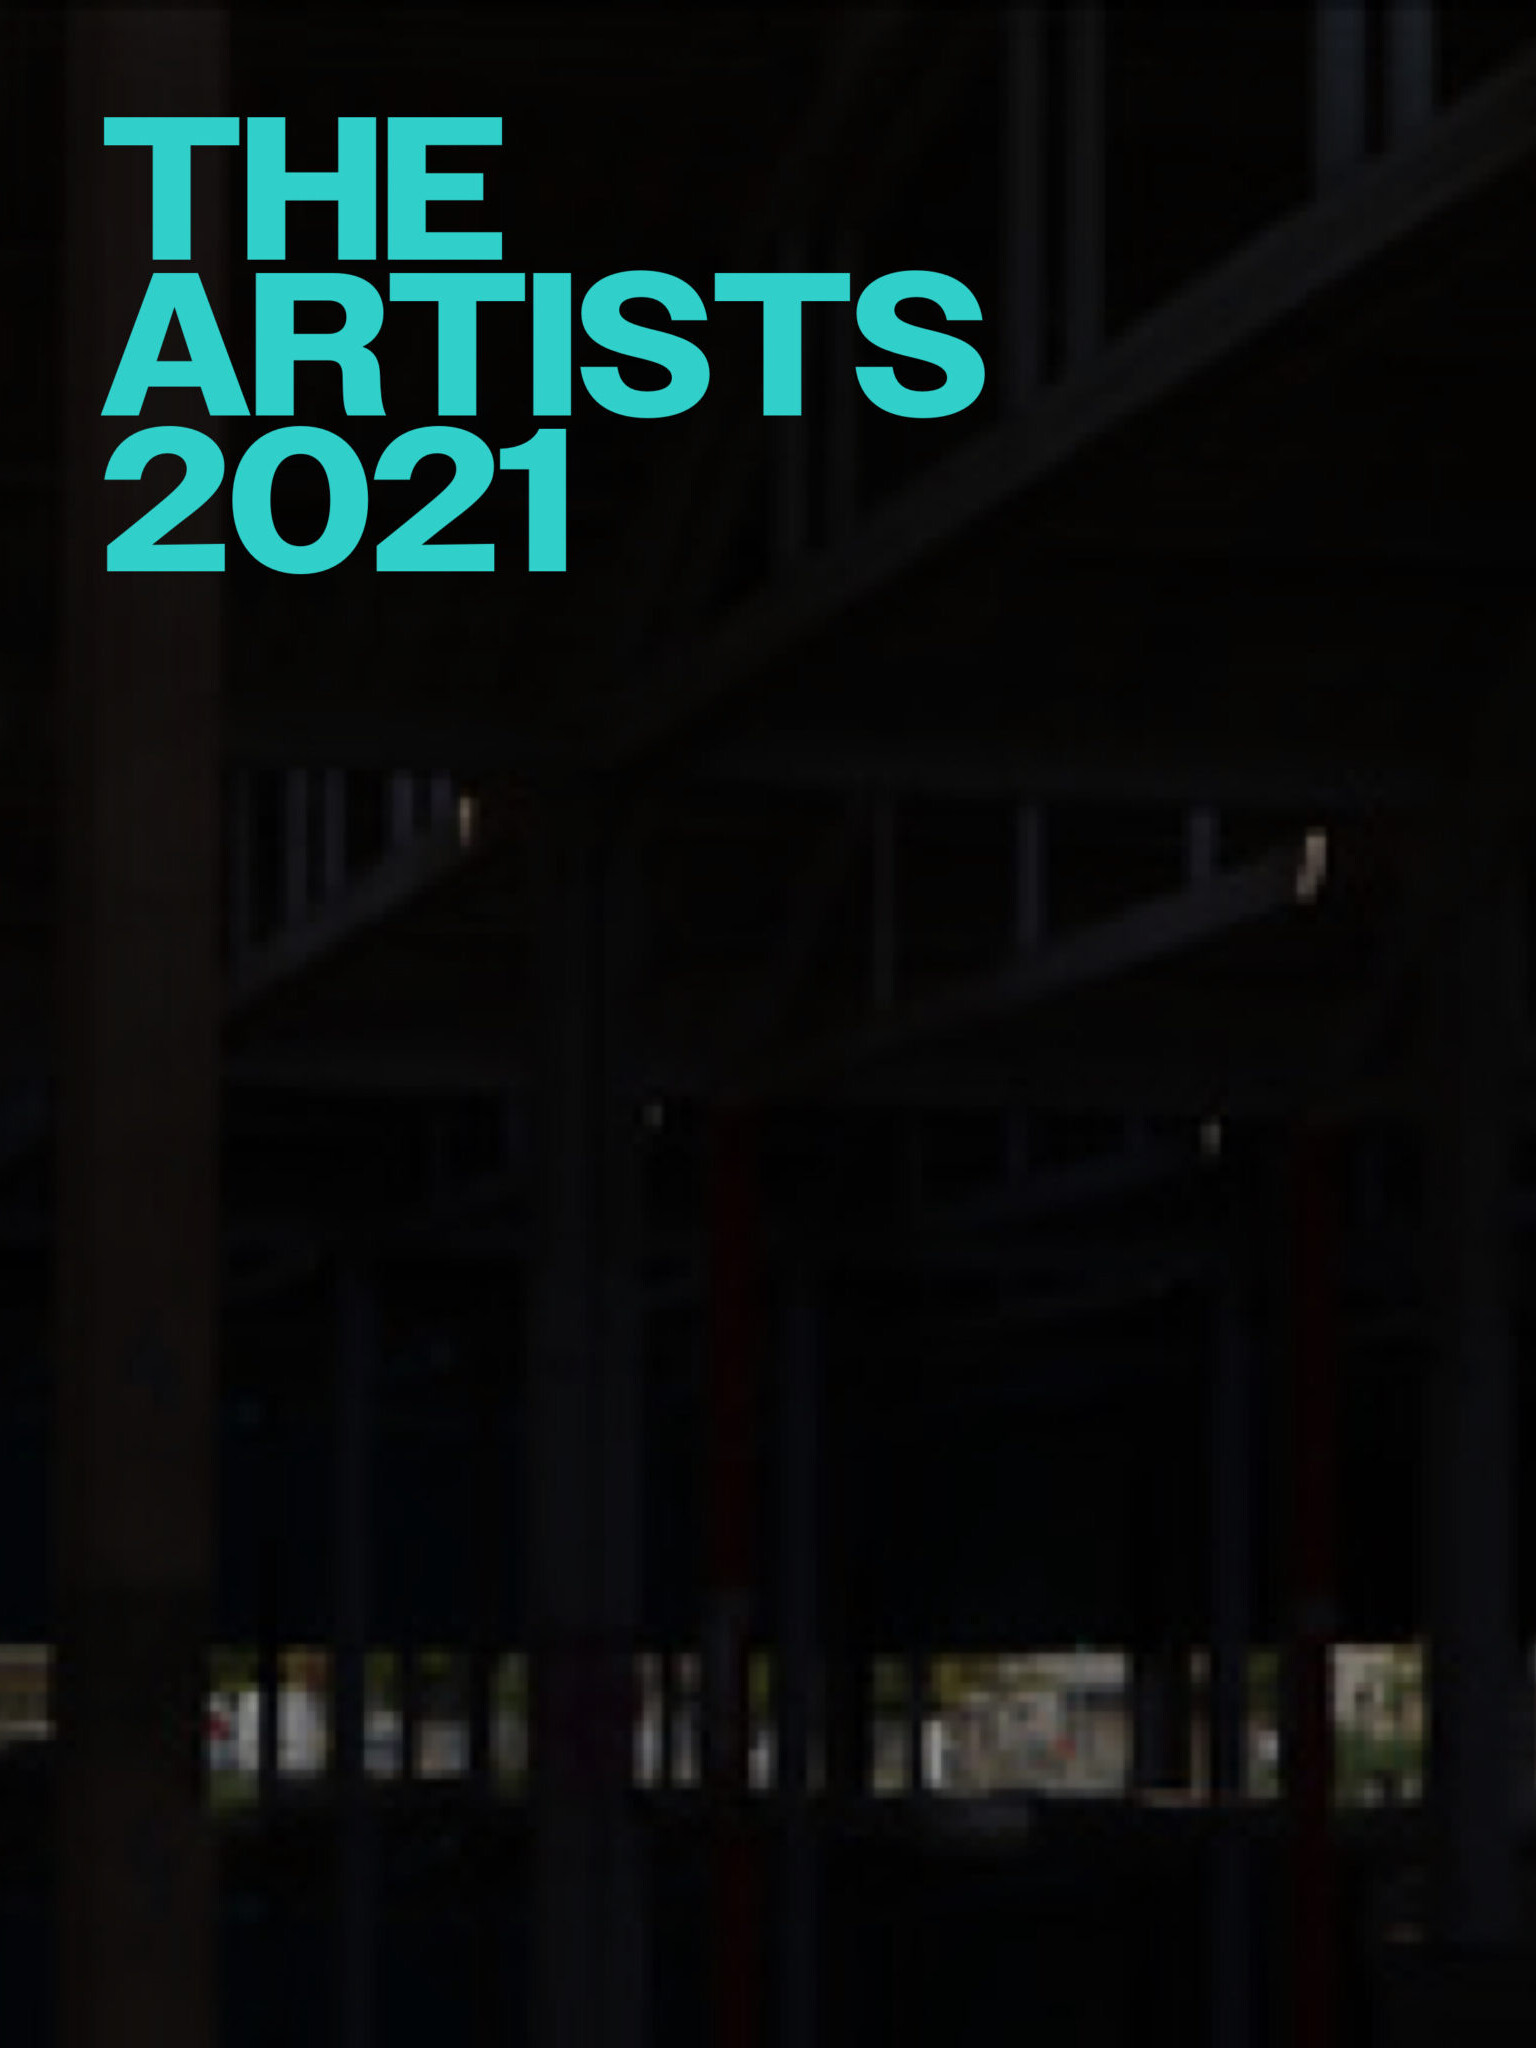 The artists of the year 2021